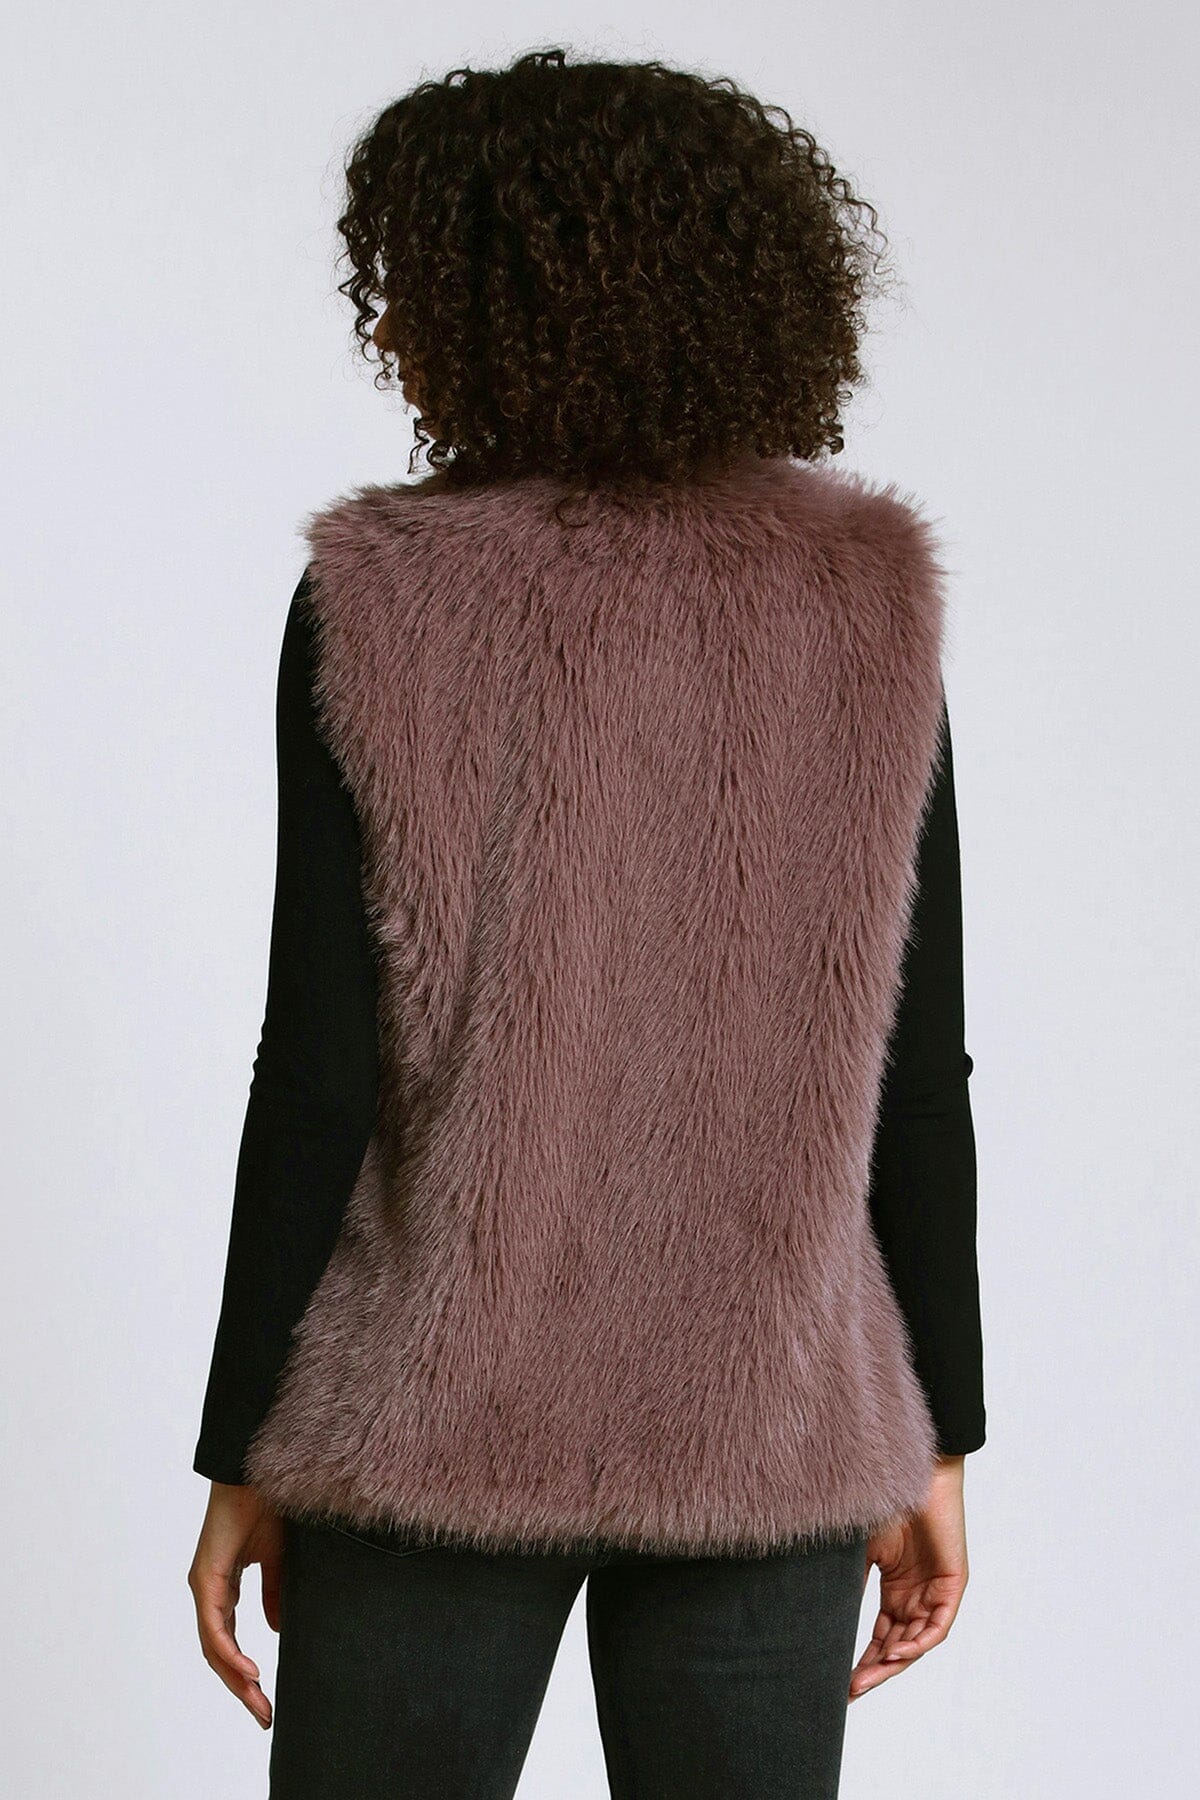 Faux fur toggle vest portabella taupe brown - women's figure flattering office to date night vests for fall 2023 fashion trends